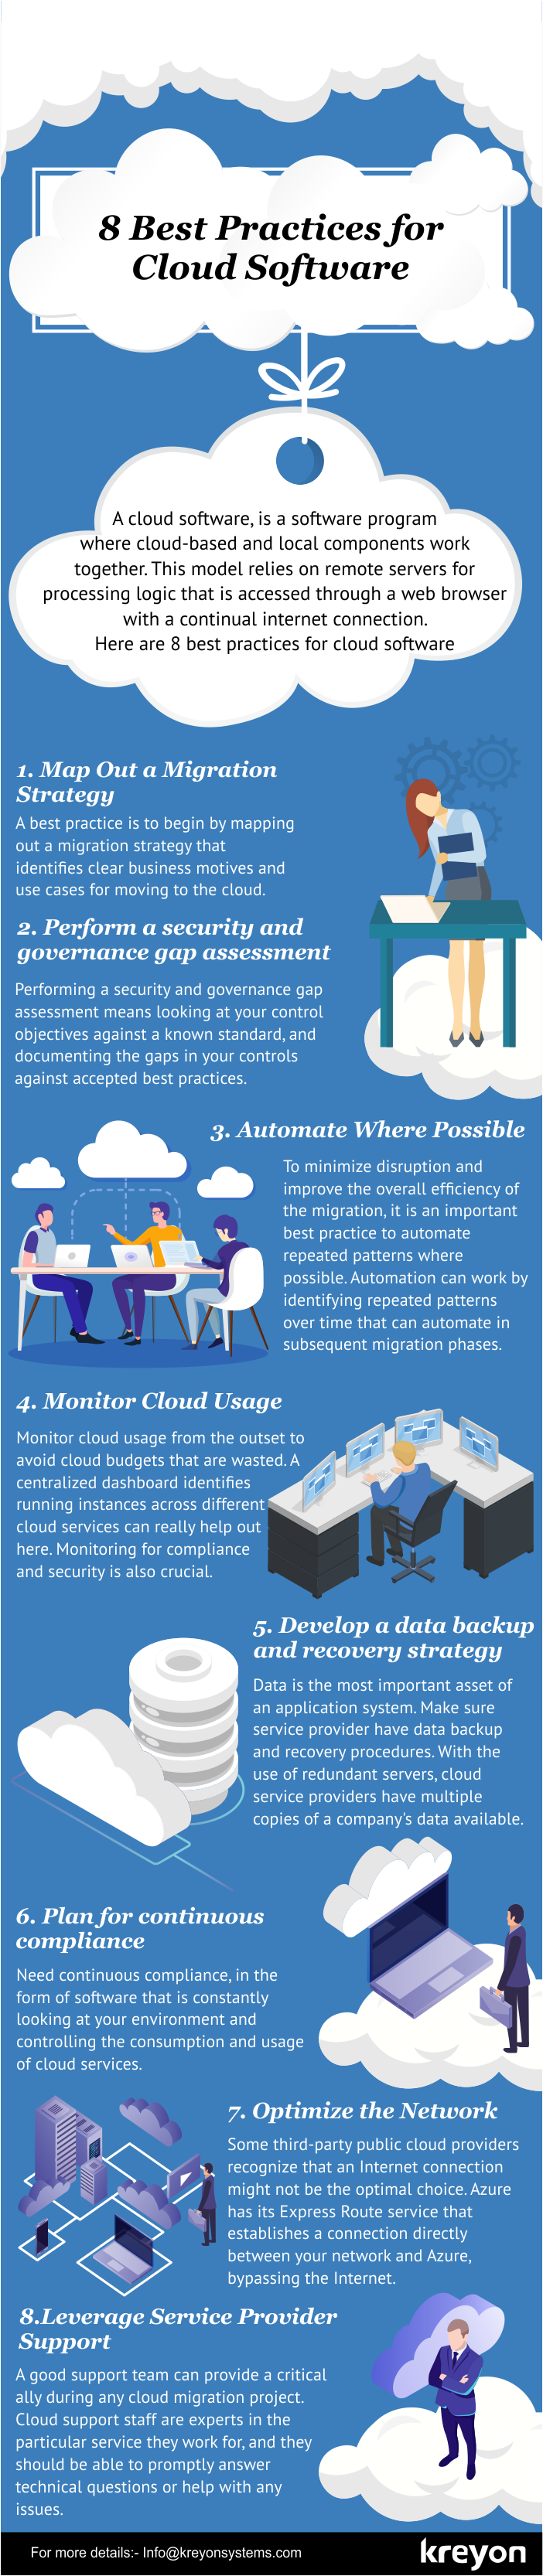 8 Best Practices for Cloud Software